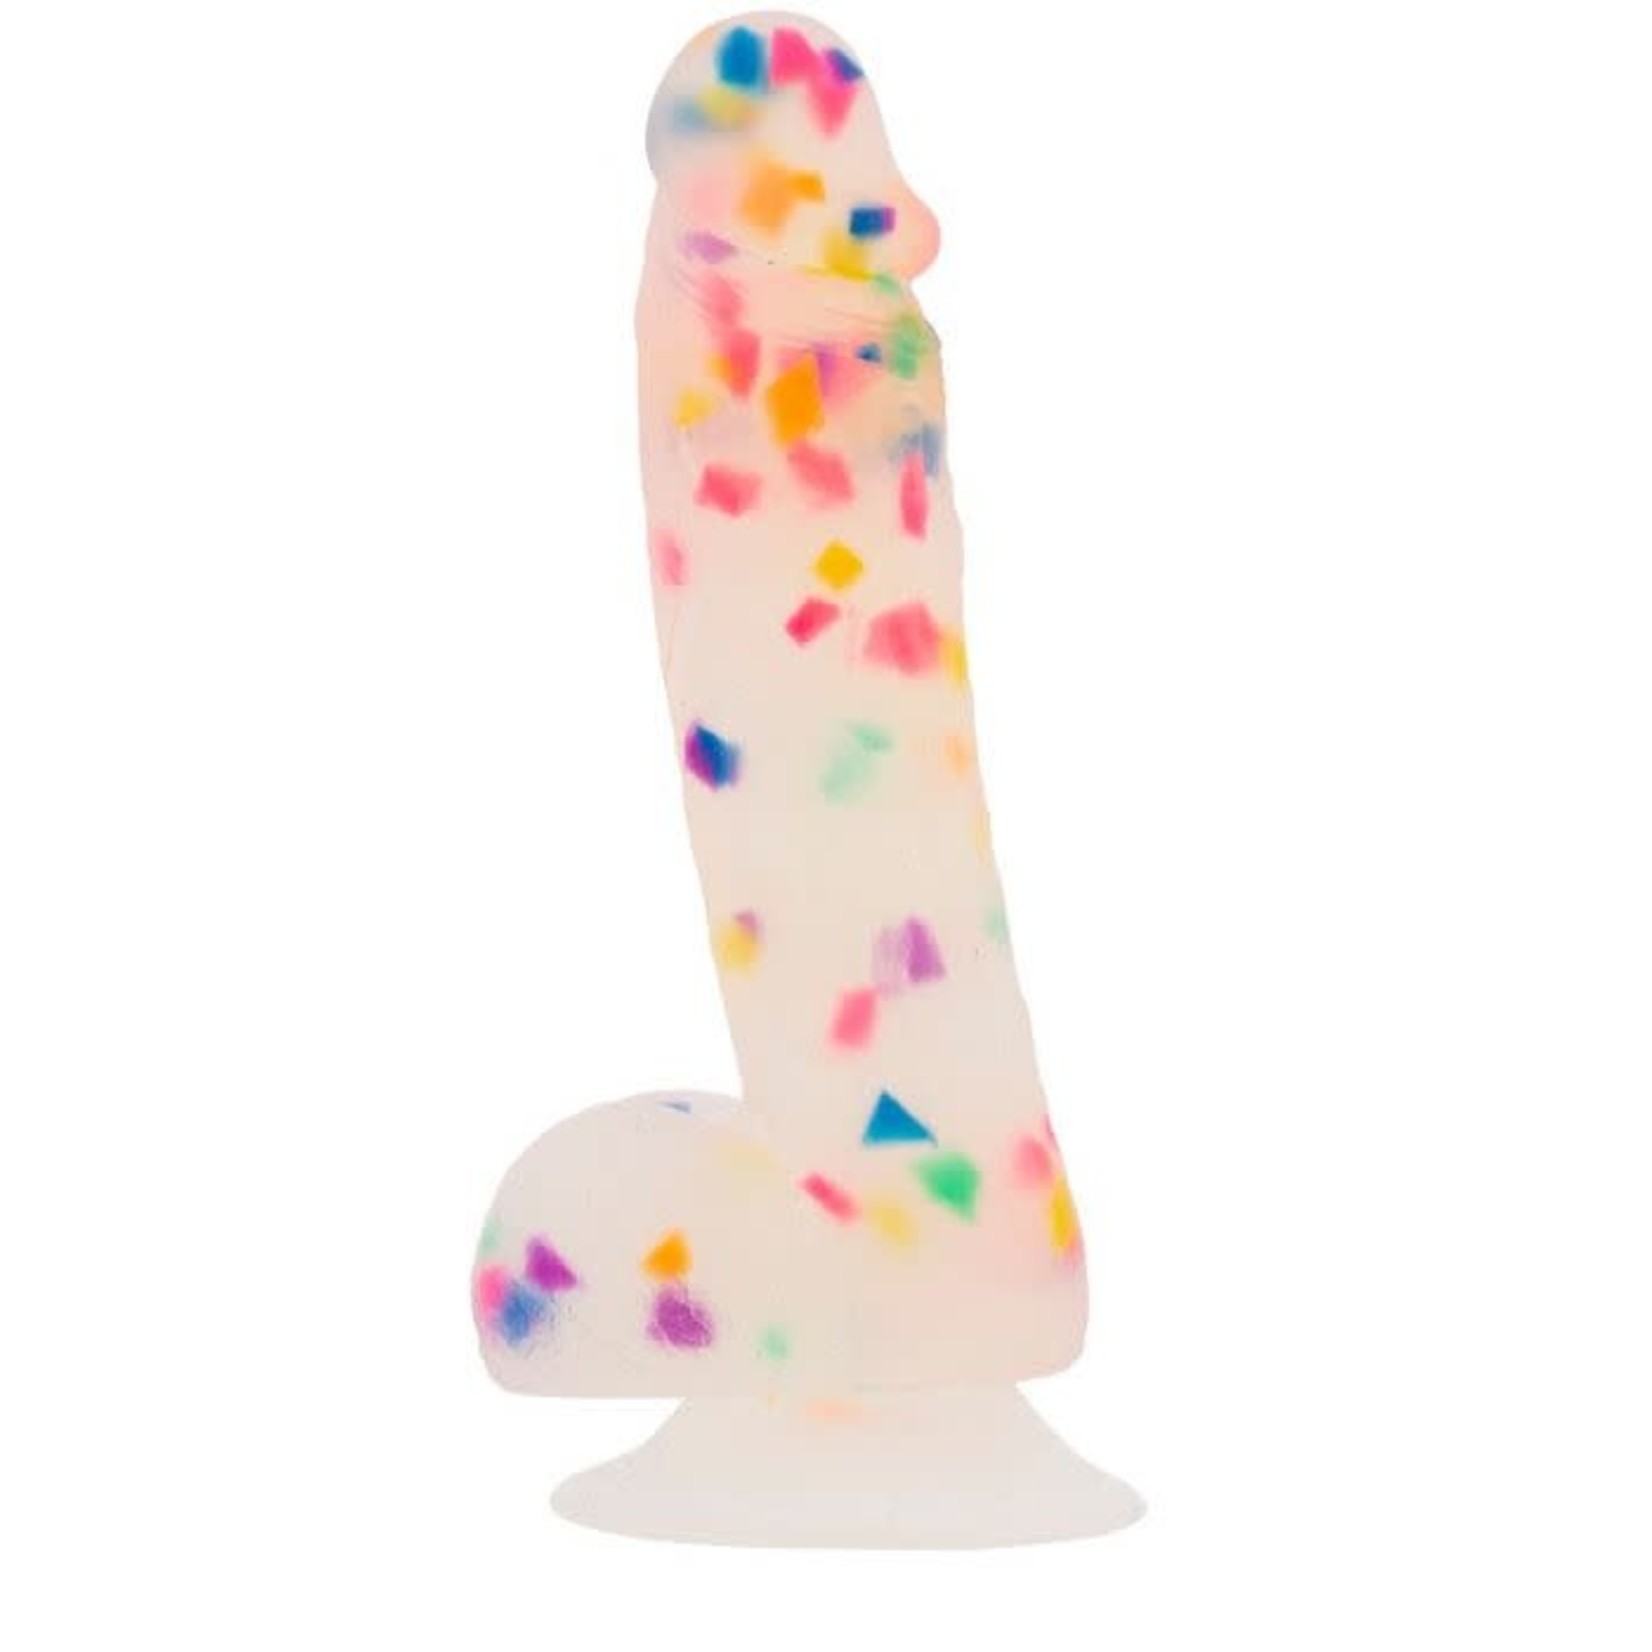 ADDICTION ADDICTION - PARTY MARTY - SILICONE CONFETTI DONG 7"